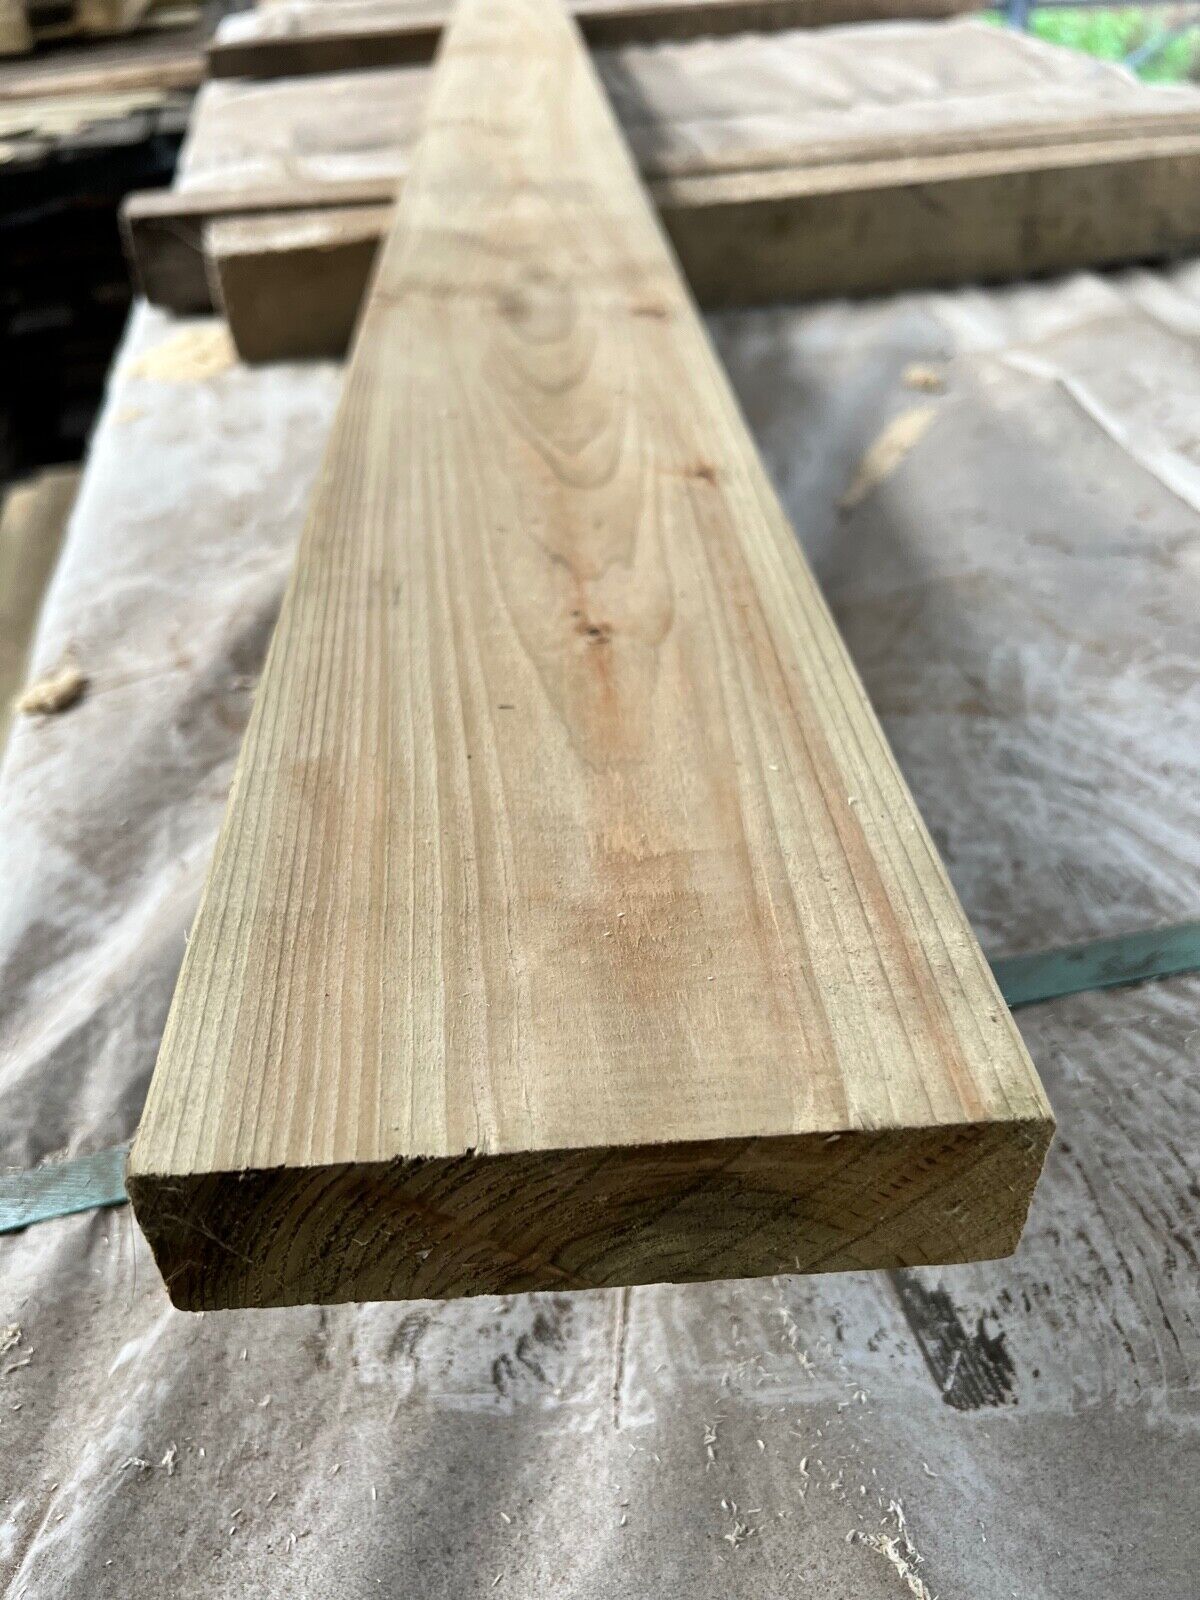 Length of tanalised CLS timber